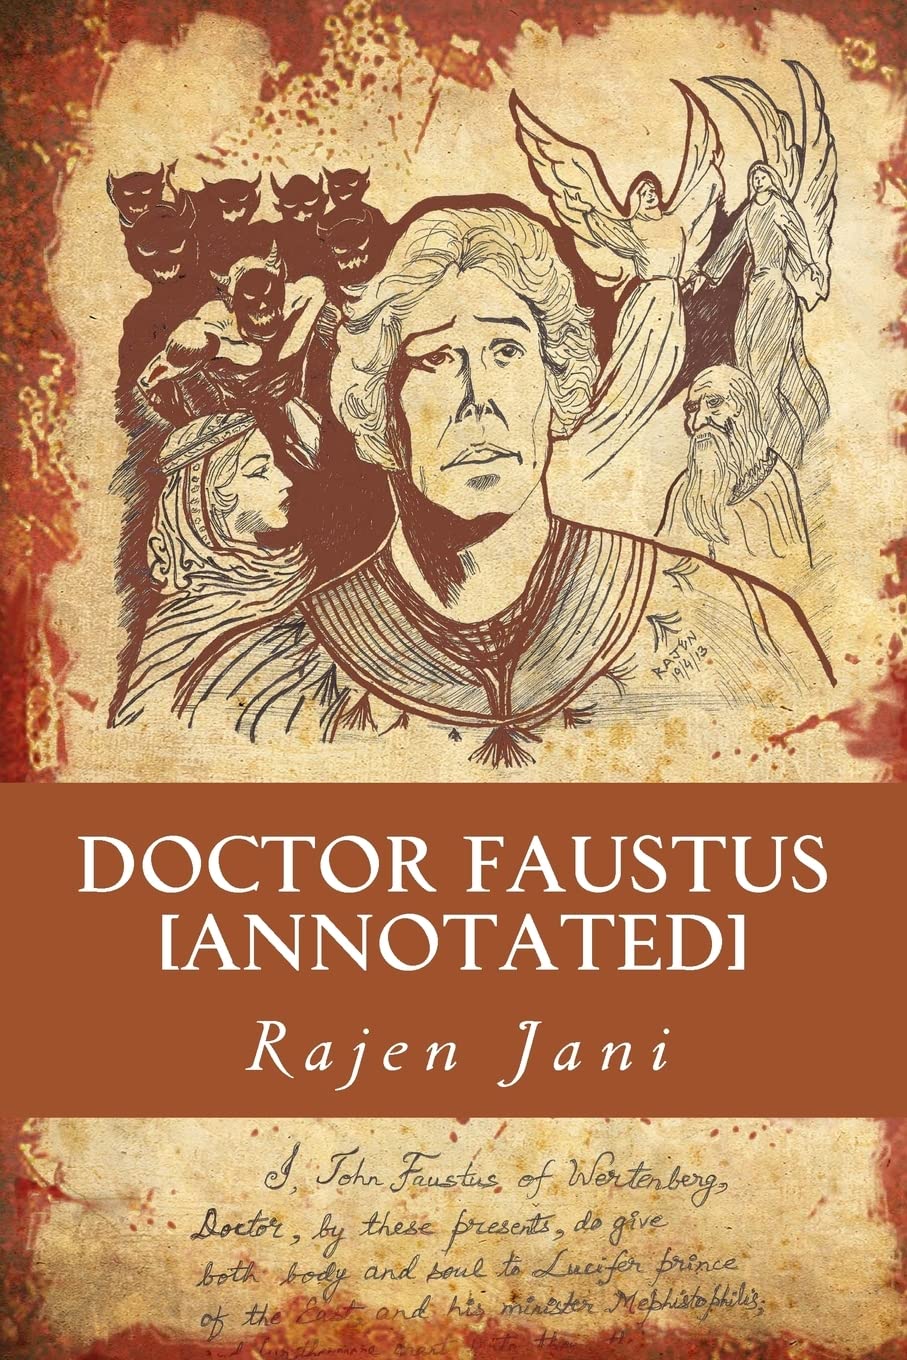 Doctor Faustus (Annotated) by Rajen Jani